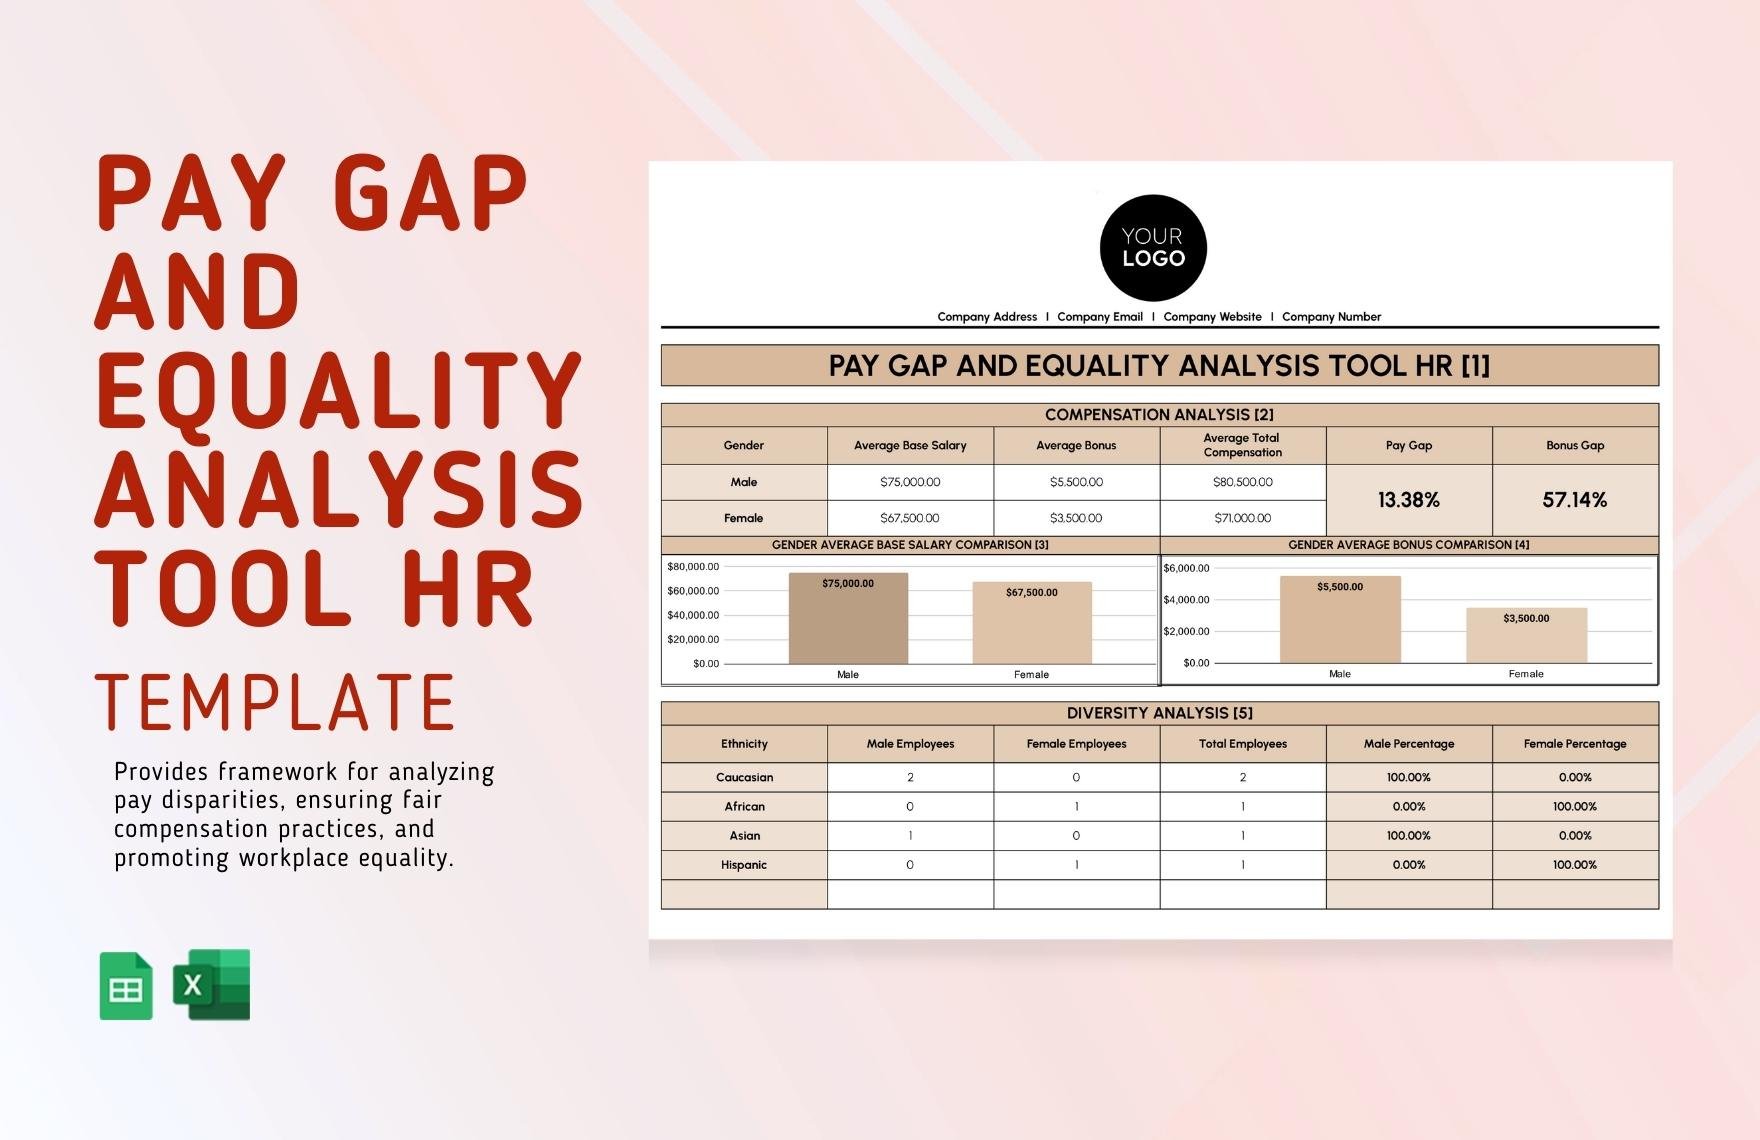 Pay Gap and Equality Analysis Tool HR Template